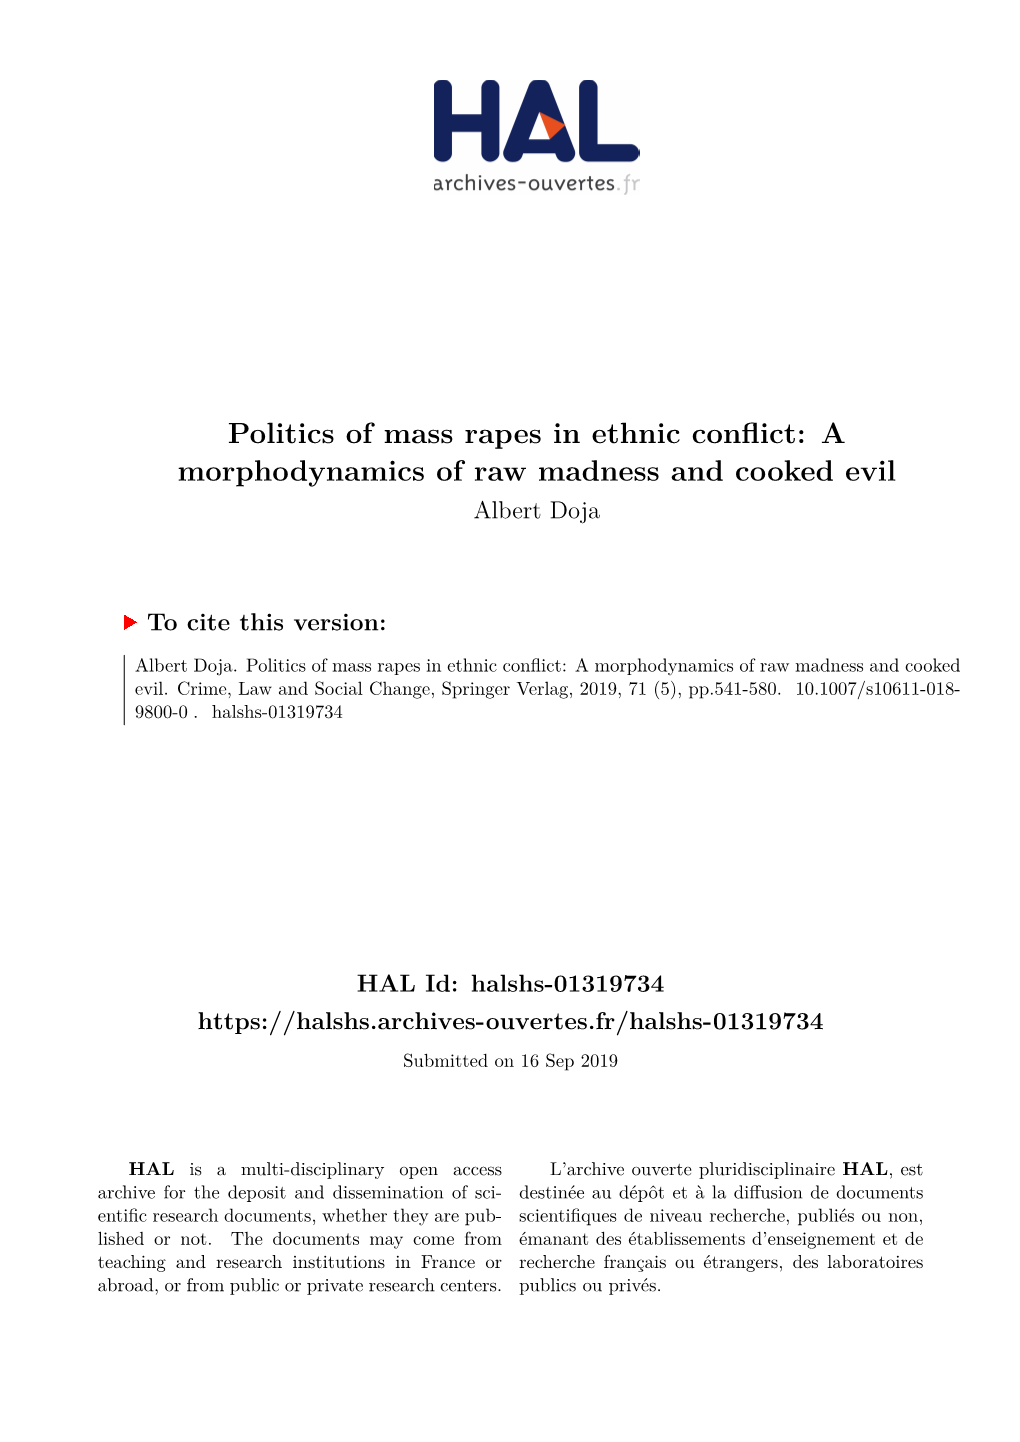 Politics of Mass Rapes in Ethnic Conflict: a Morphodynamics of Raw Madness and Cooked Evil Albert Doja